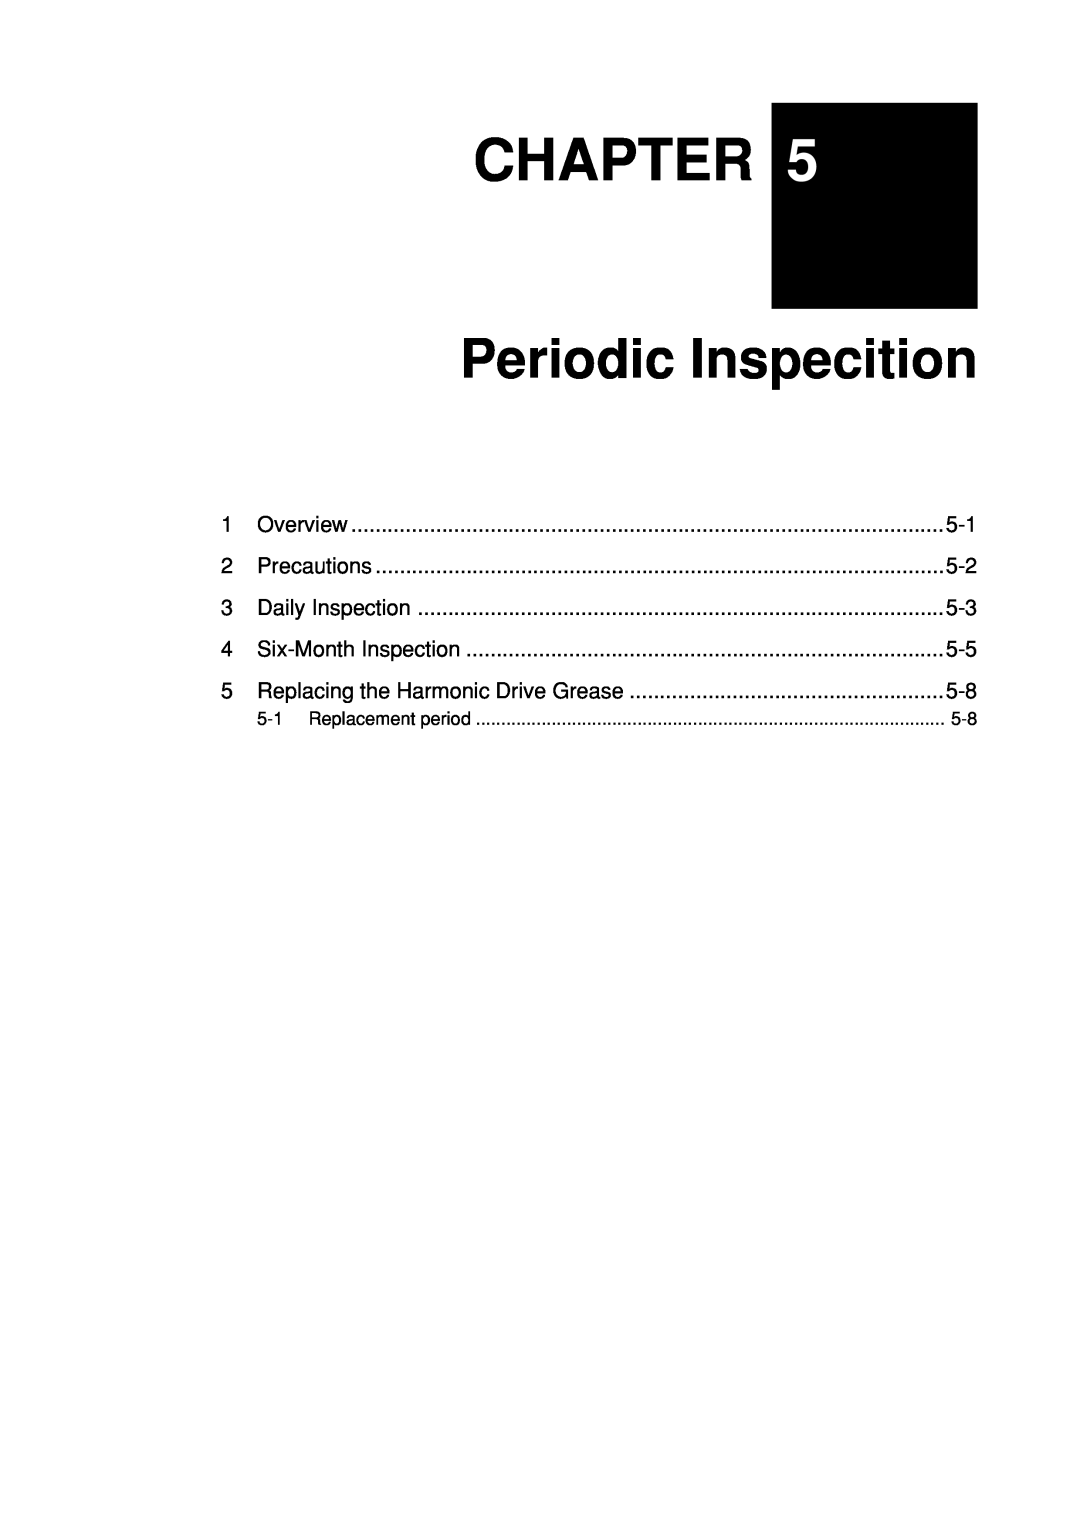 Yamaha YK120X, YK180X owner manual Periodic Inspecition, Chapter, Replacement period 